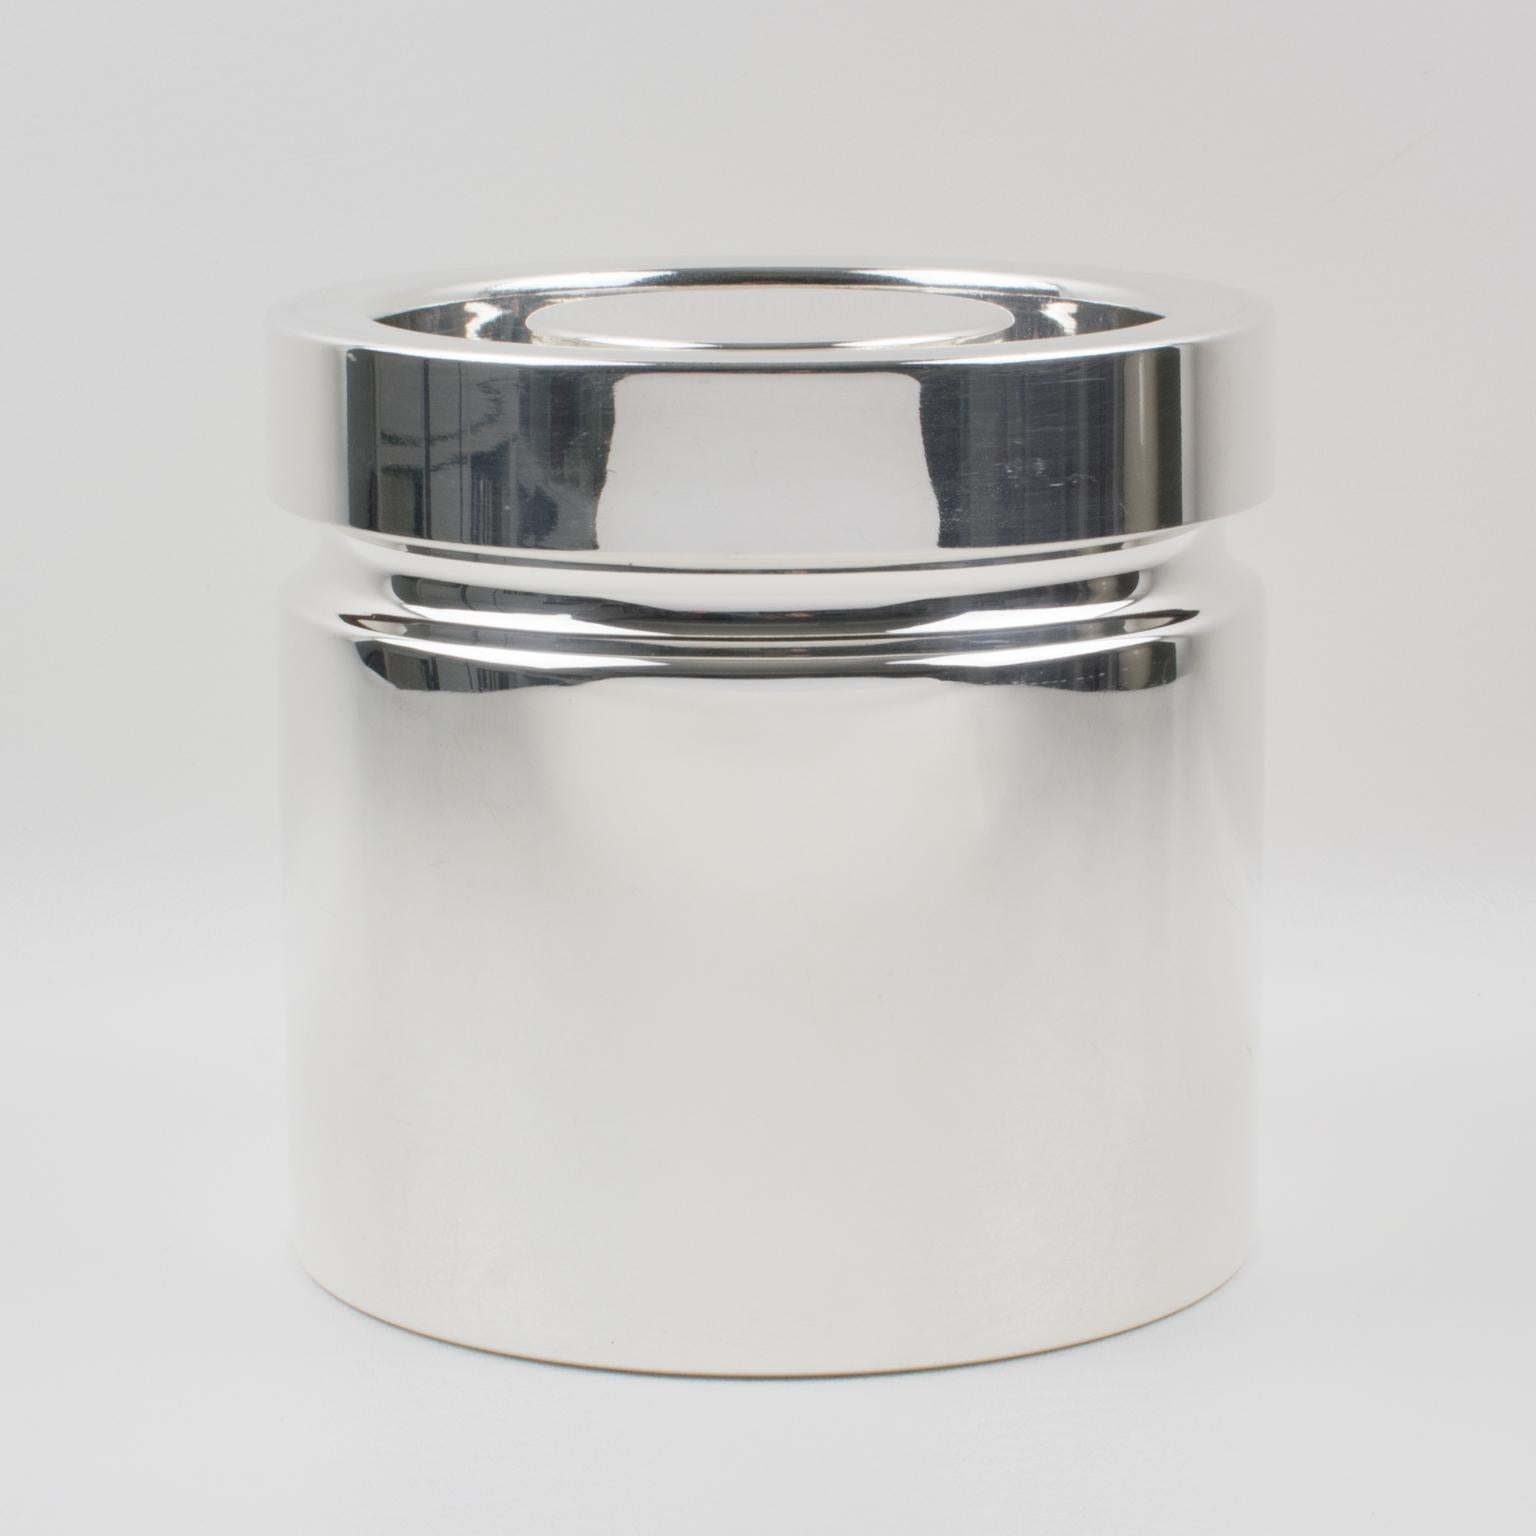 Modernist silver plate ice bucket designed by Lino Sabattini for his eponymous firm. This rounded ice bucket has a Minimalist design with glass inlaid.
Measurements: 6.50 in. diameter (16.5 cm) x 6.13 in. high (15.5 cm).